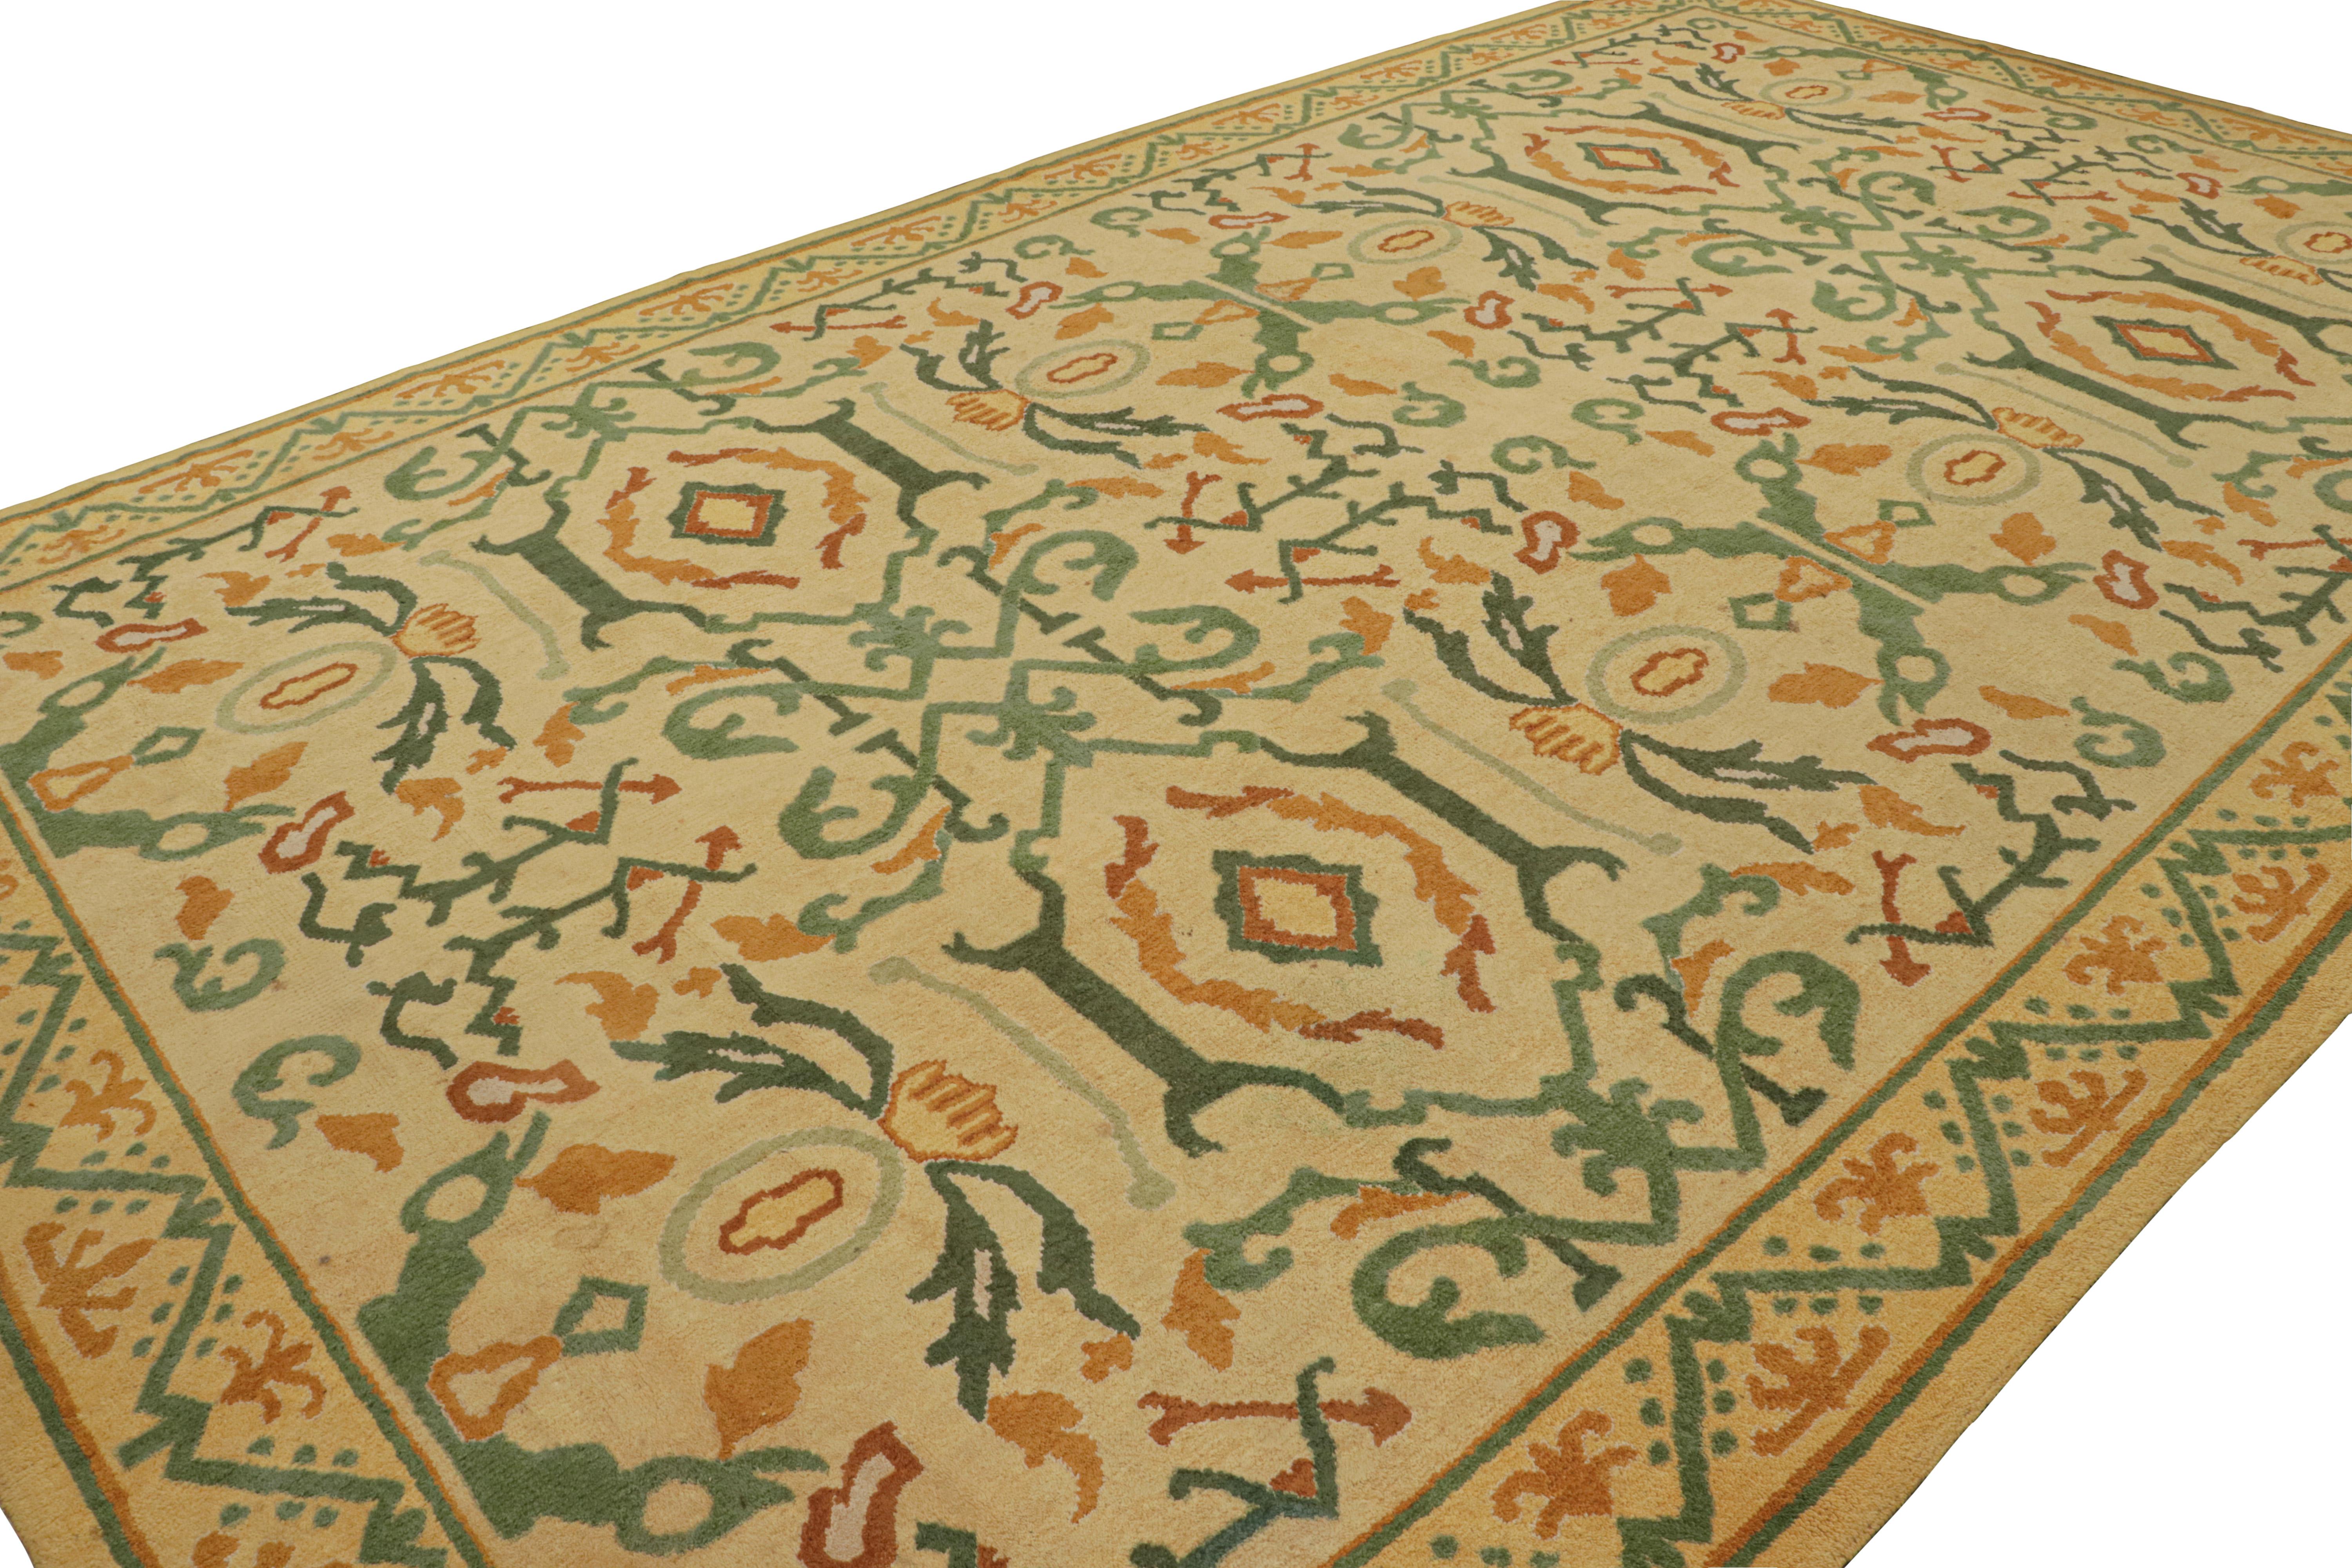 Hand-knotted in wool, this 11x19 vintage Spanish rug in gold features geometric patterns in green and orange that draw on Art Nouveau sensibilities. 

On the Design:

Admirers of the craft may note an inspiration from Art Nouveau sensibilities in